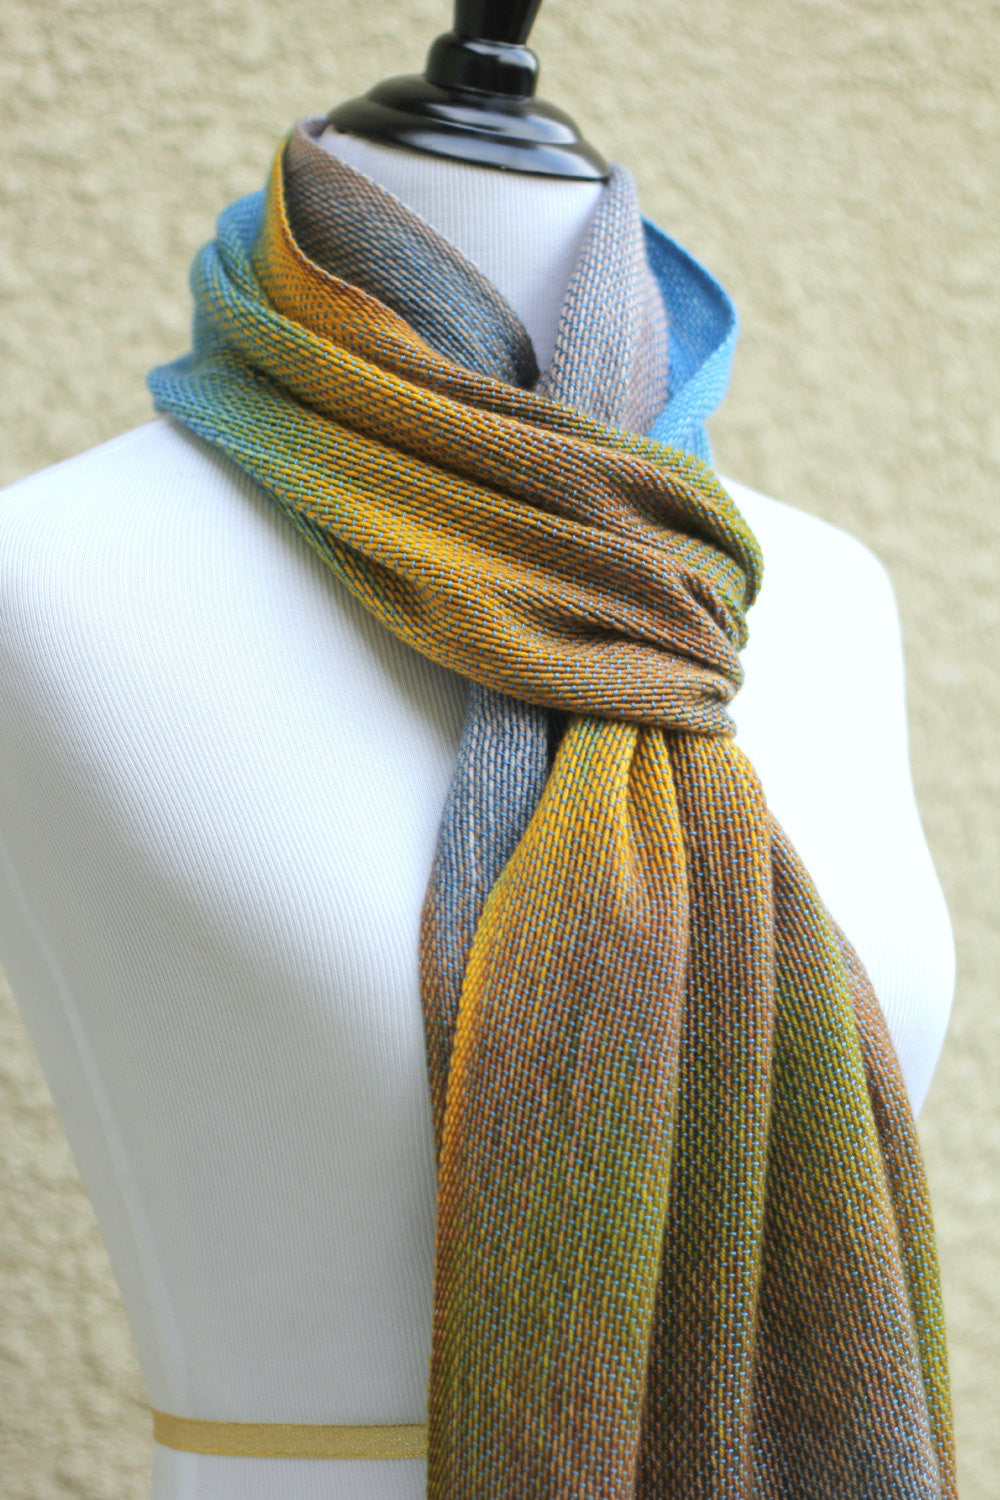 Woven scarf in blue, yellow and beige colors, gift for her